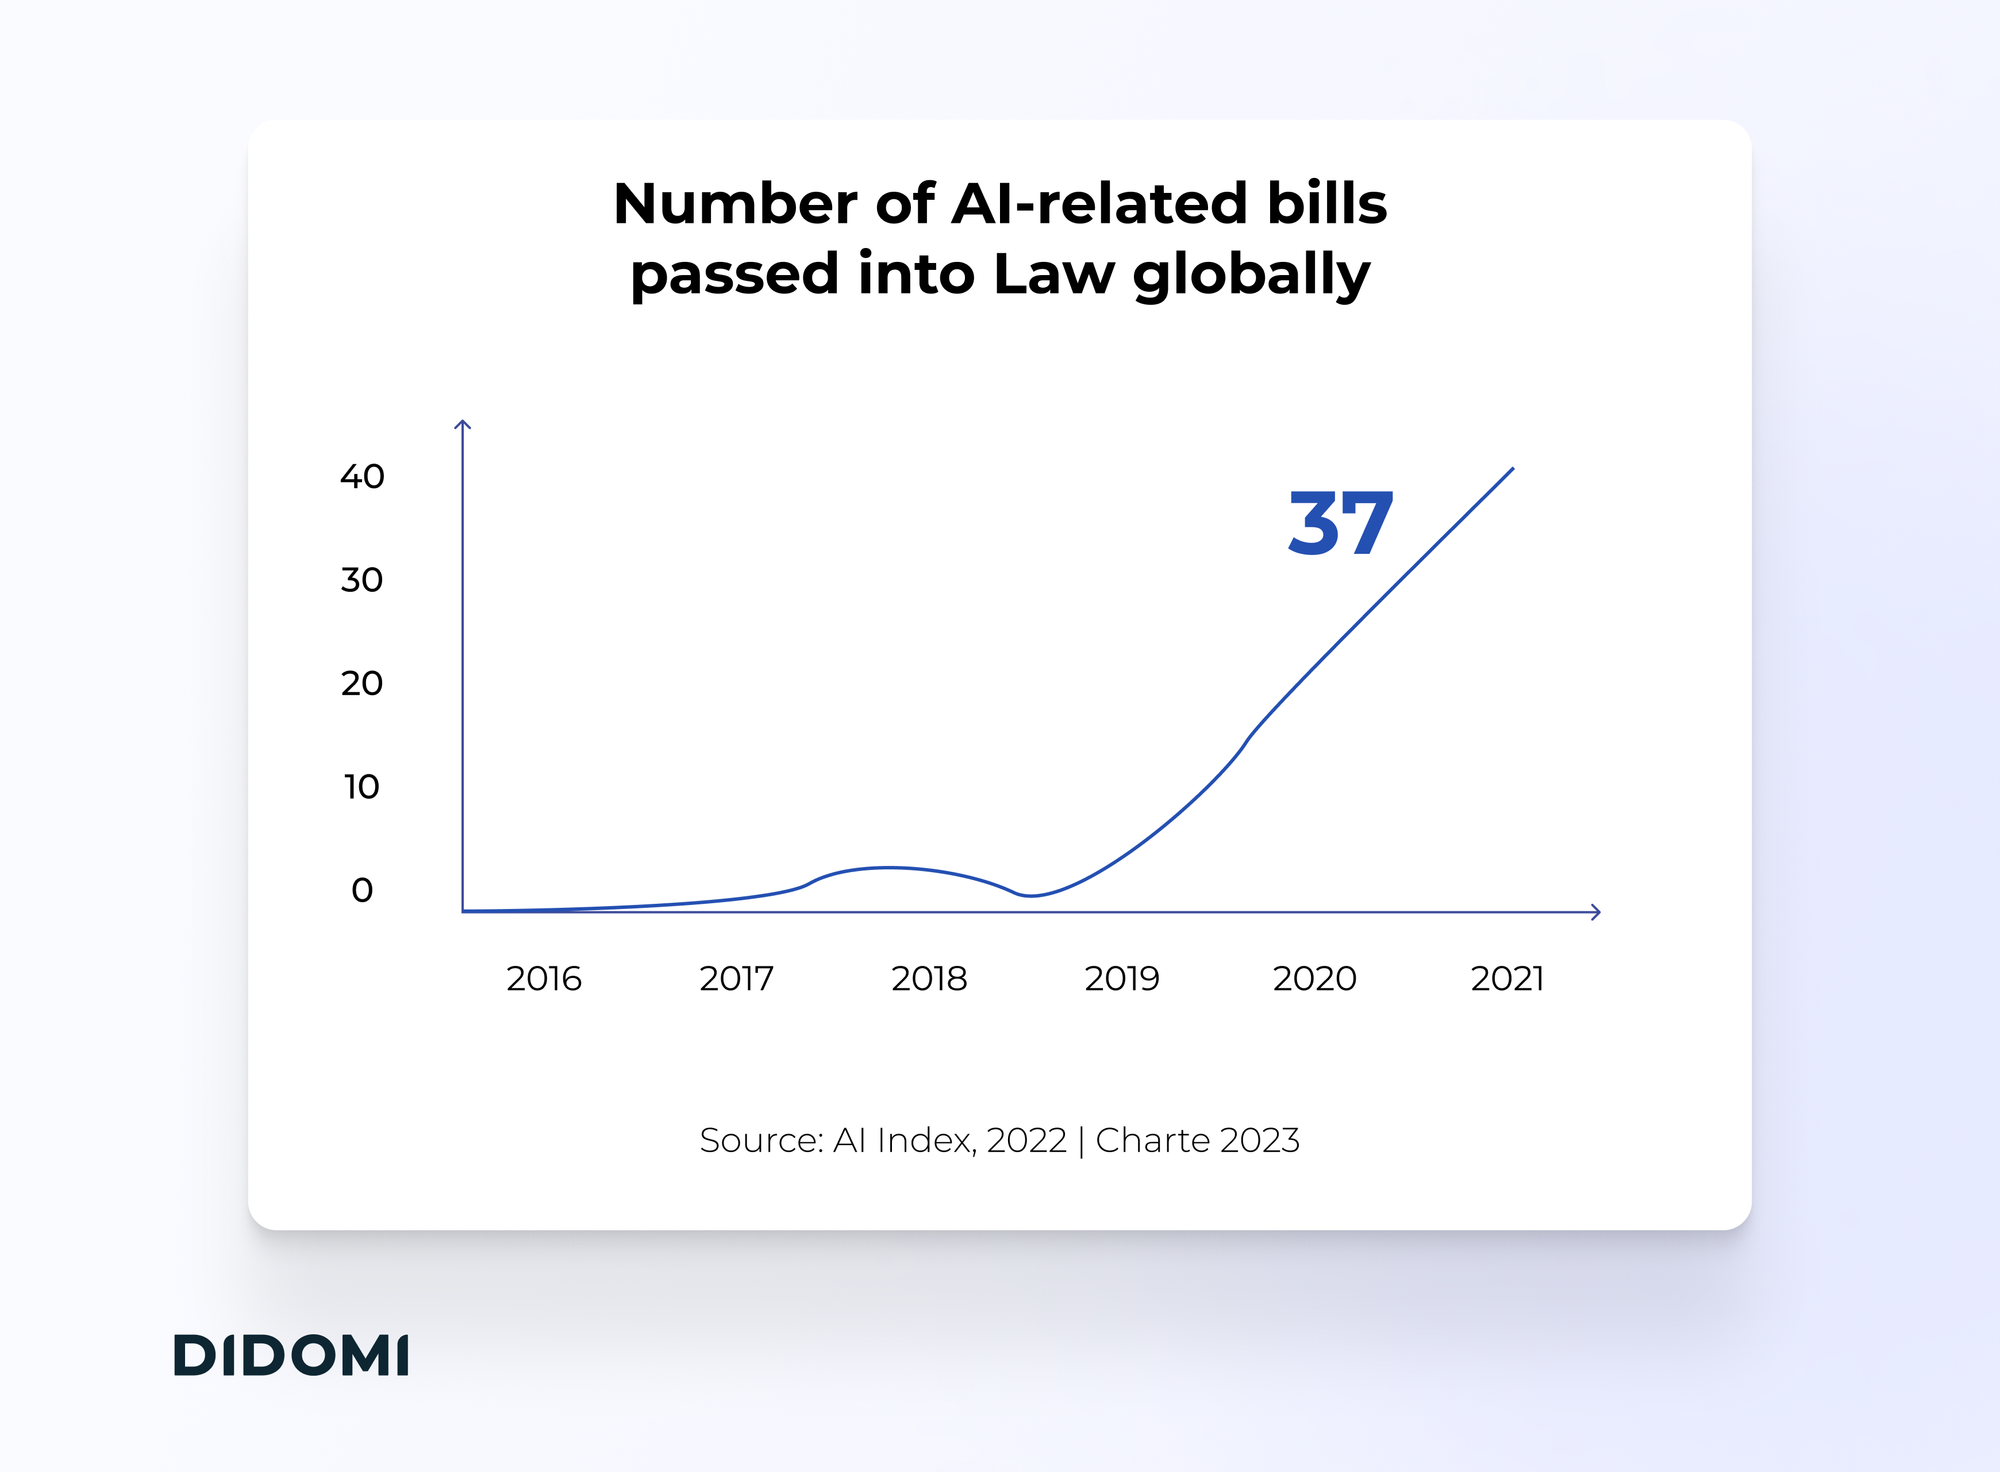 A graph showing the growth in the number of AI-related bills passed into law globally, from 0 in 2016 to under 10 in 2018 to 37 in 2021